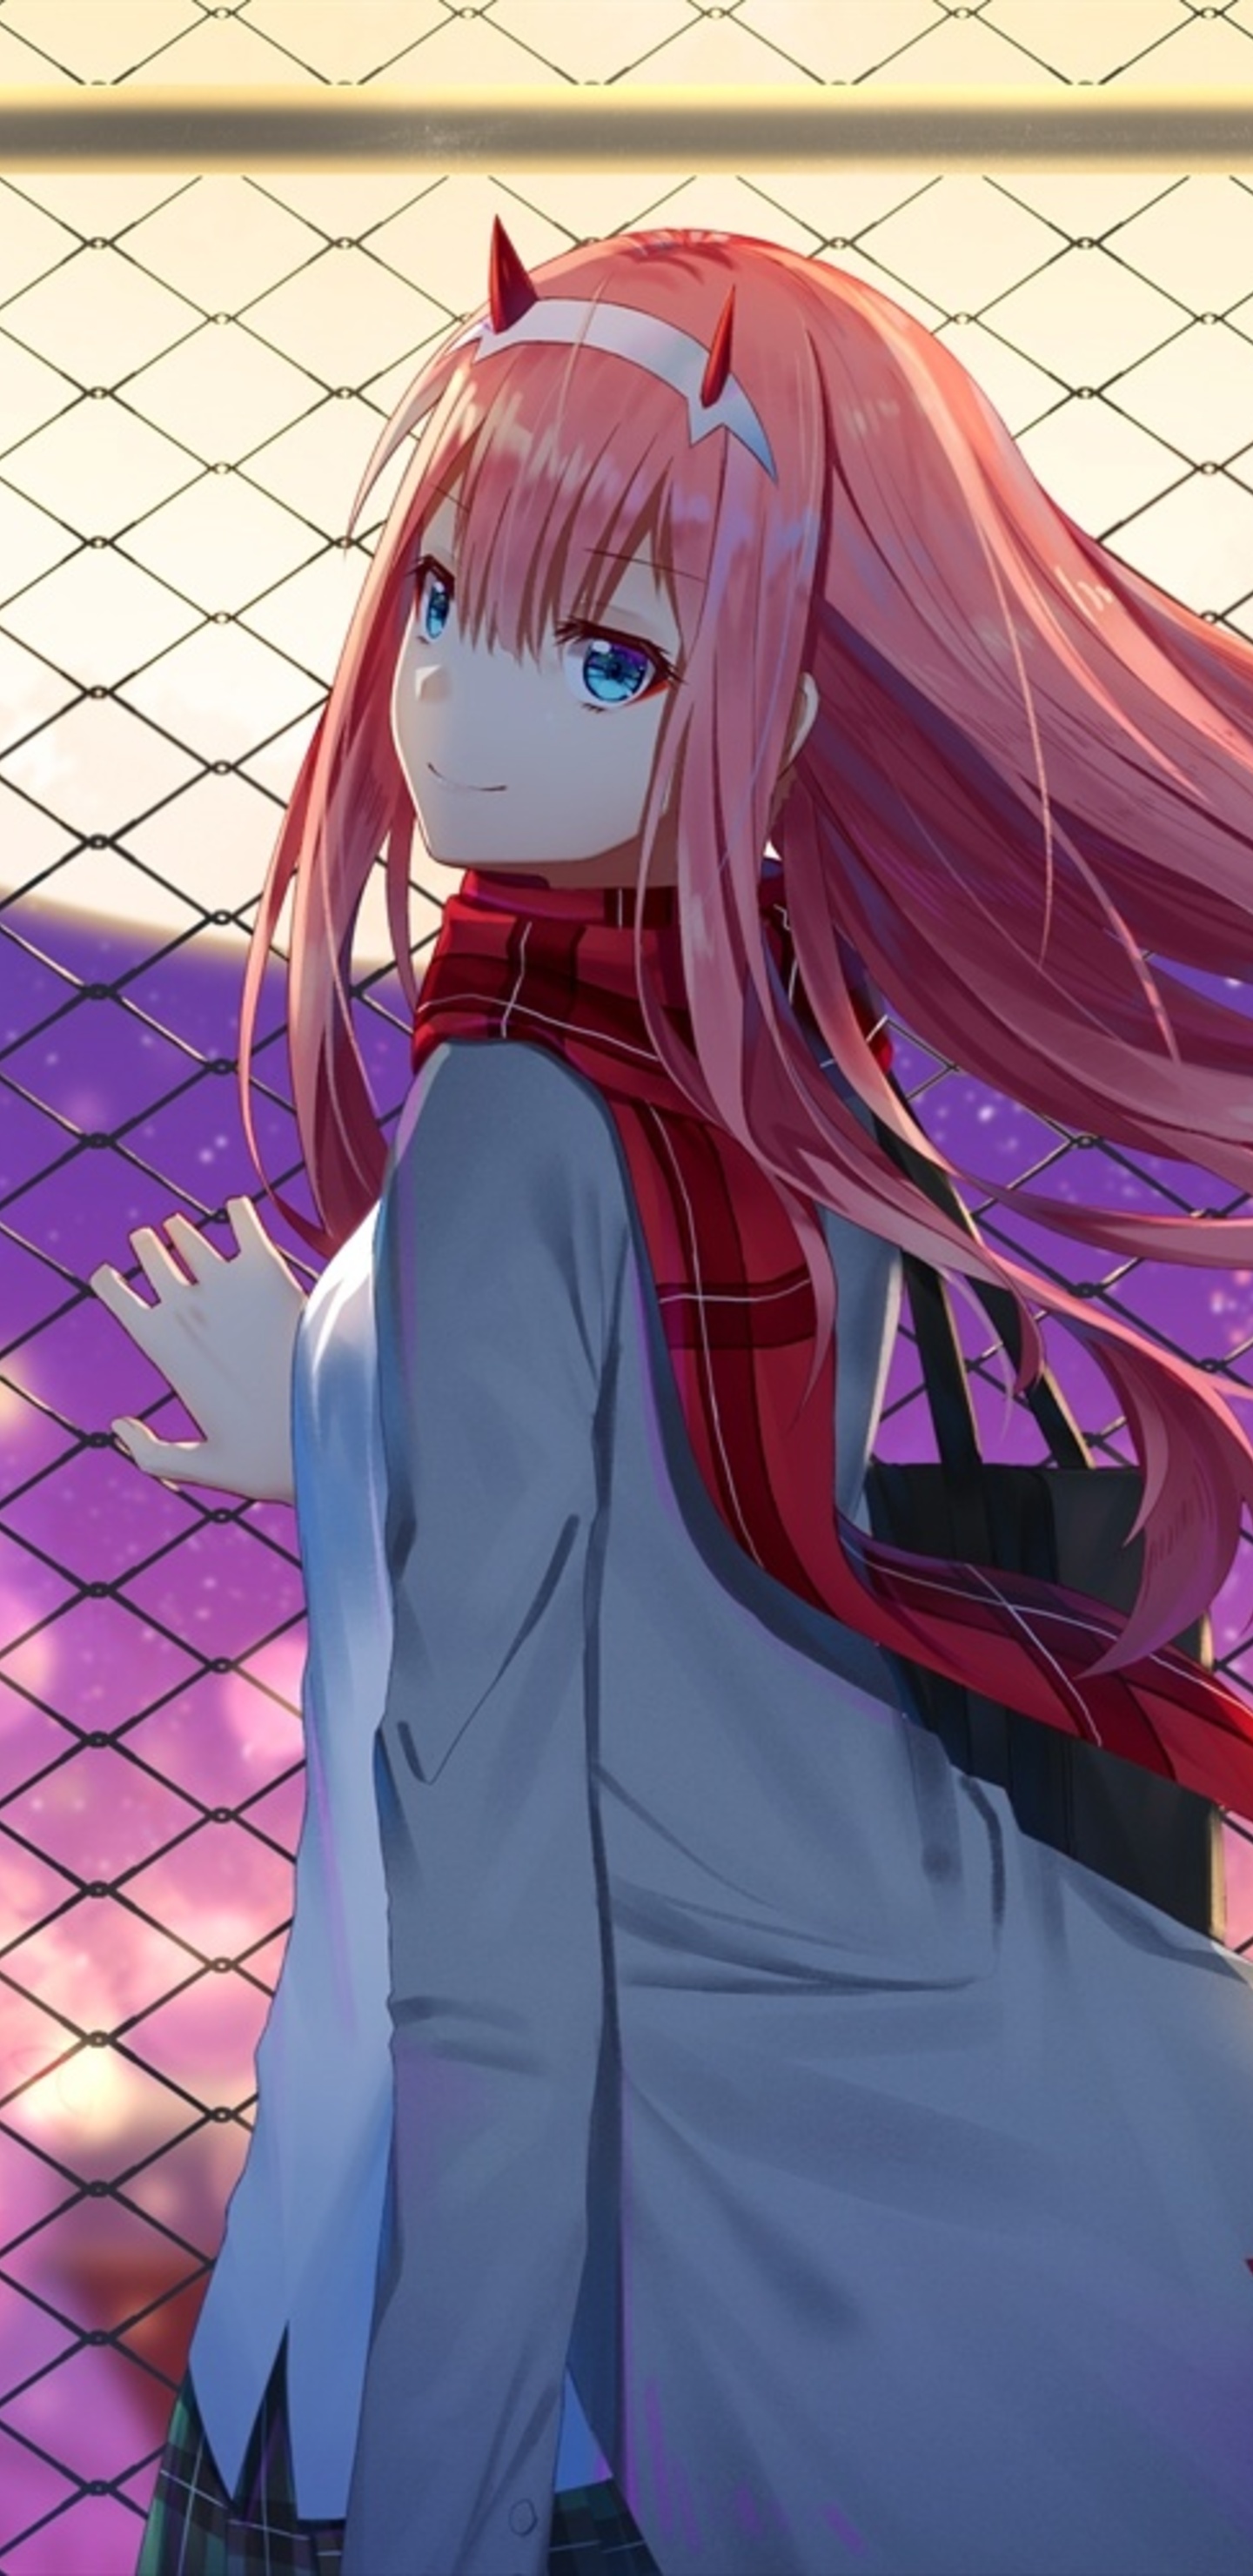 1440x2960 Zero Two Darling In The Franxx Samsung Galaxy Note 9 8 S9 S8 S8 Qhd Hd 4k Wallpapers Images Backgrounds Photos And Pictures